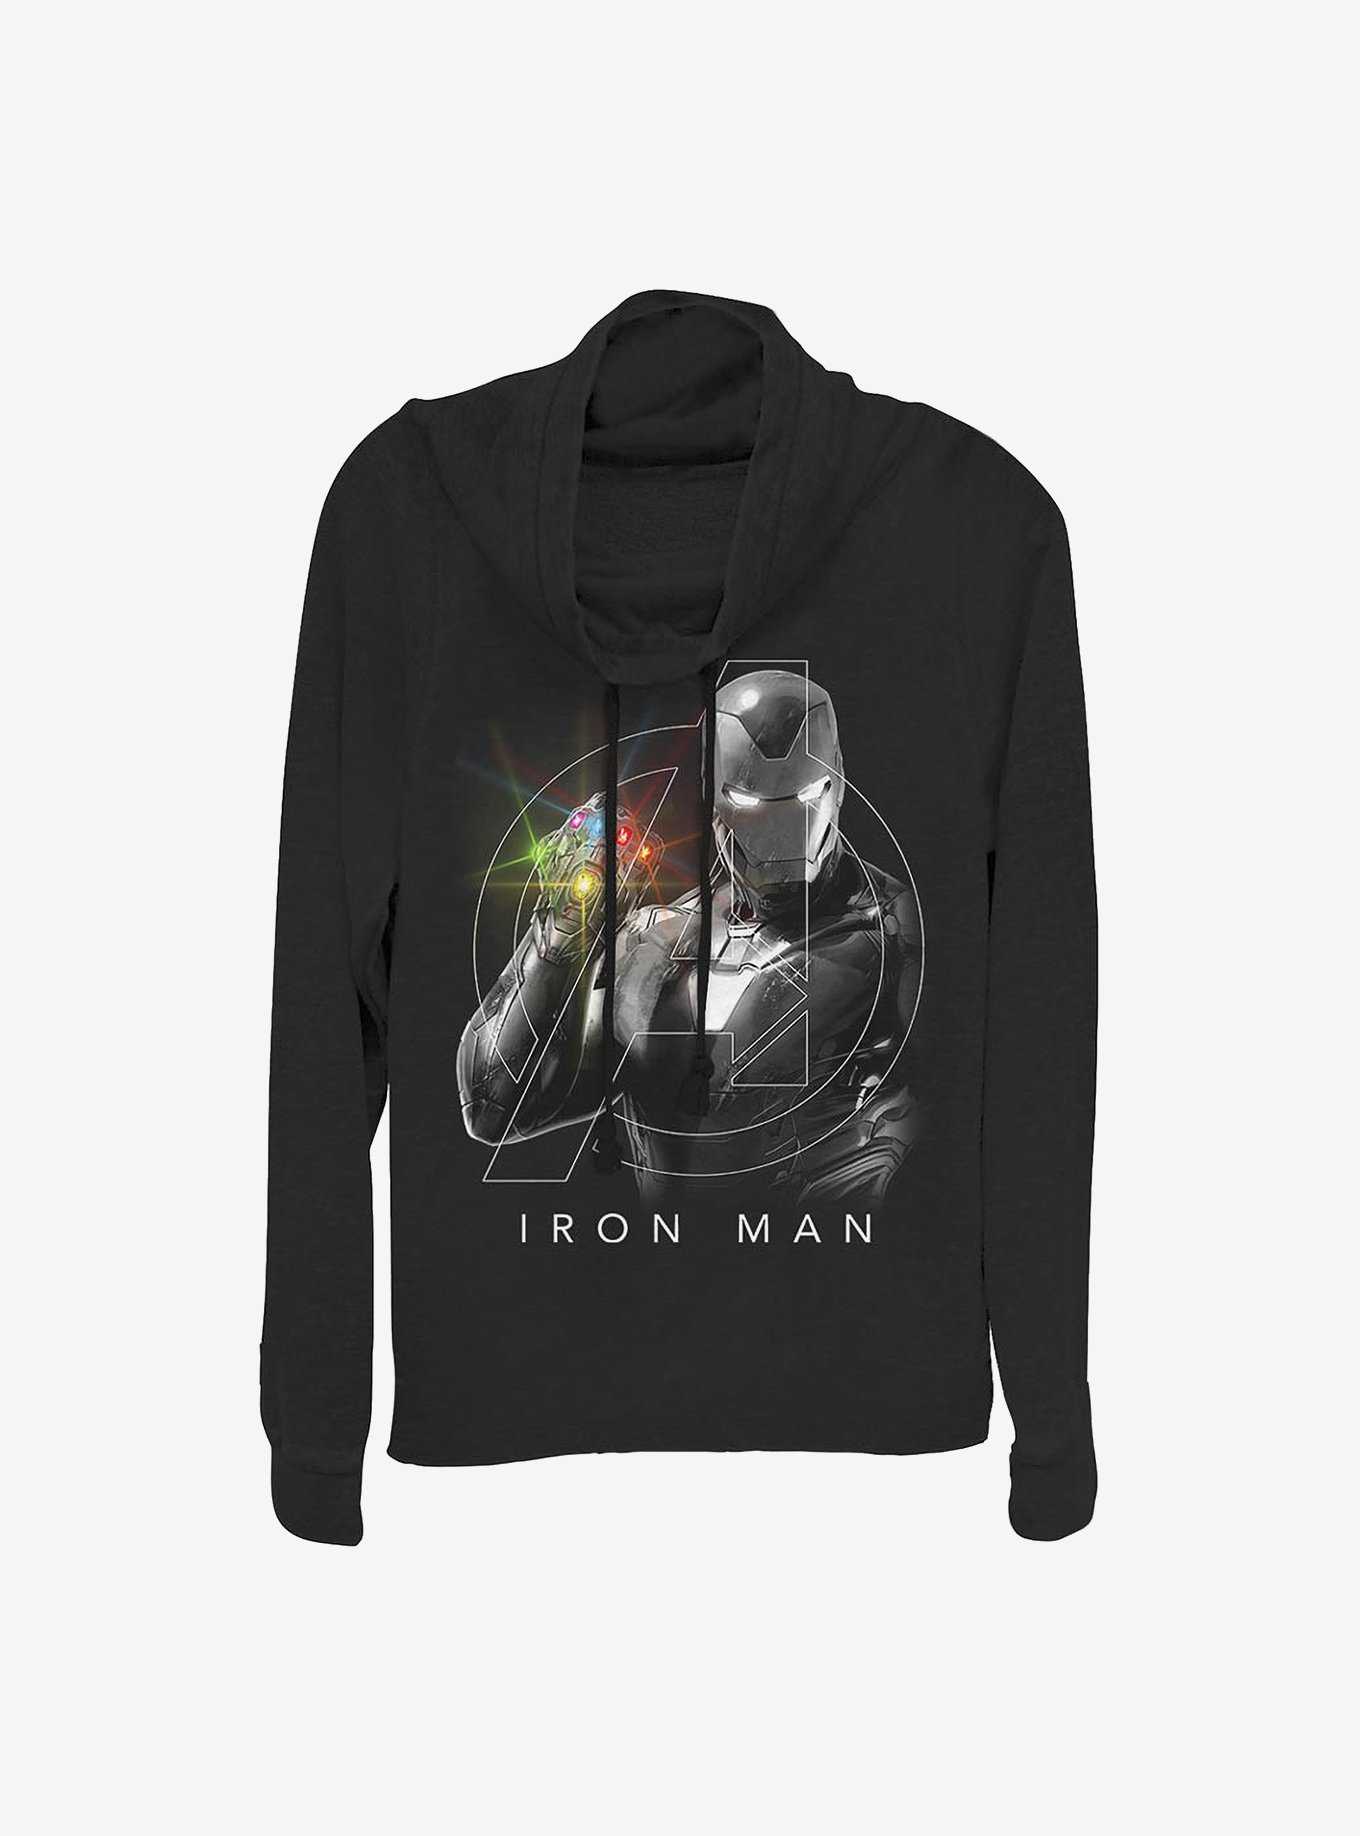 Marvel Iron Man Only One Cowlneck Long-Sleeve Girls Top, , hi-res